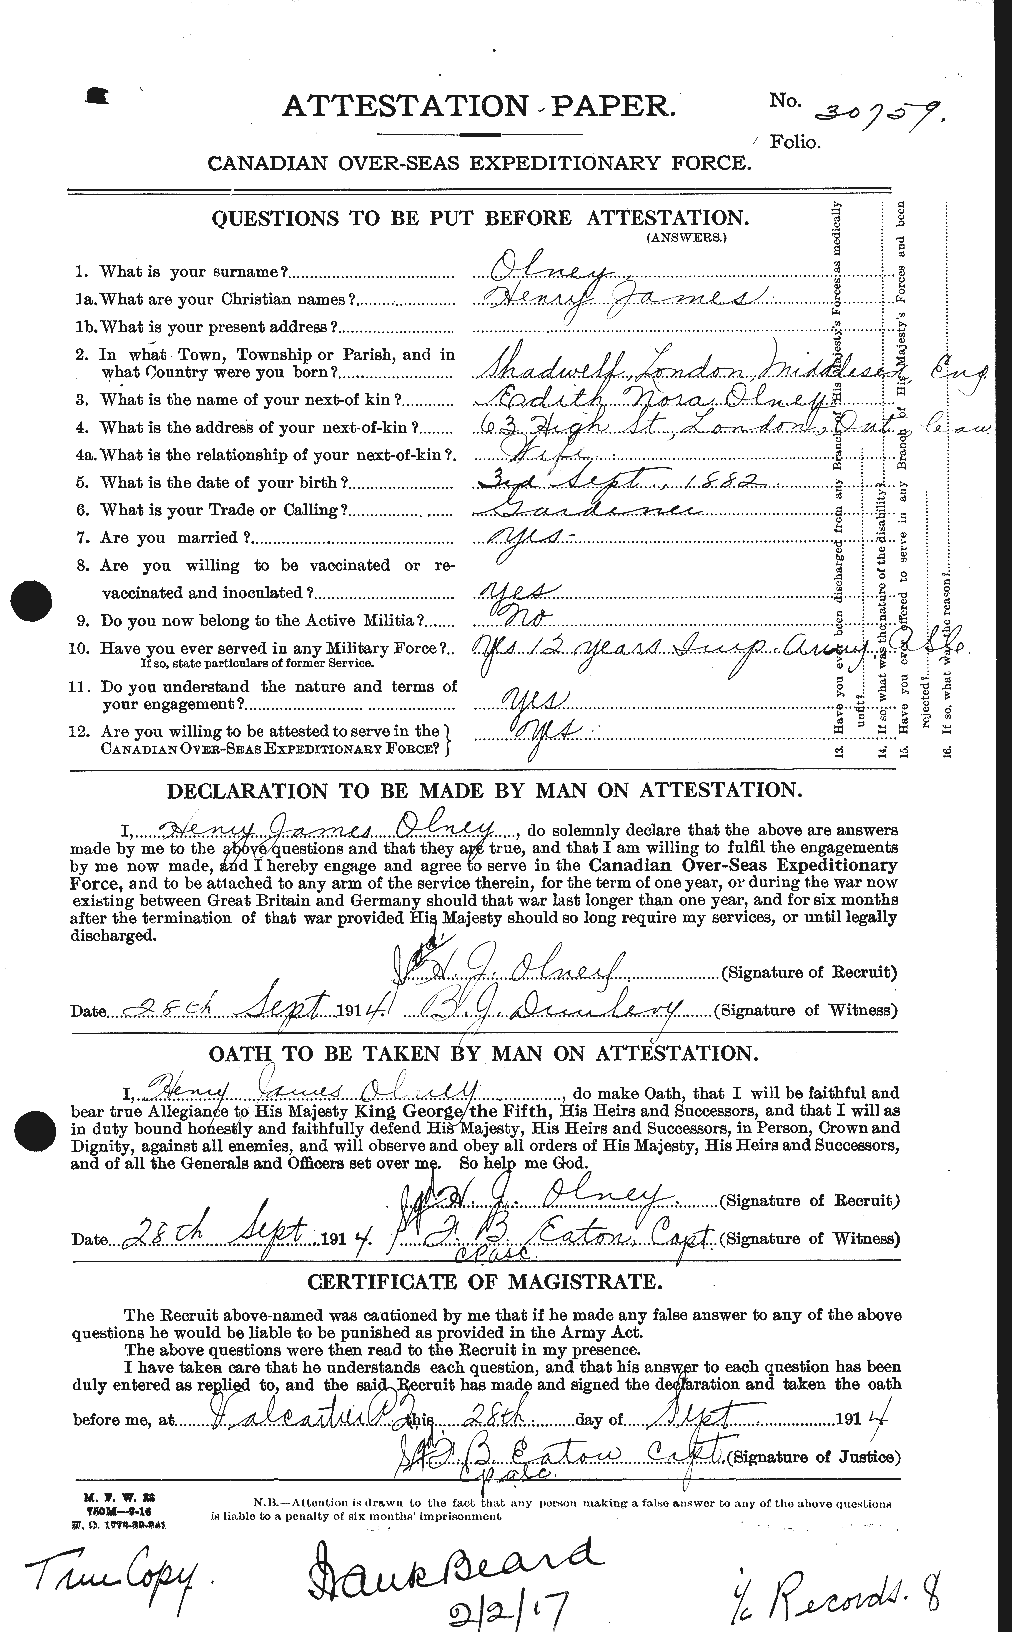 Personnel Records of the First World War - CEF 555714a